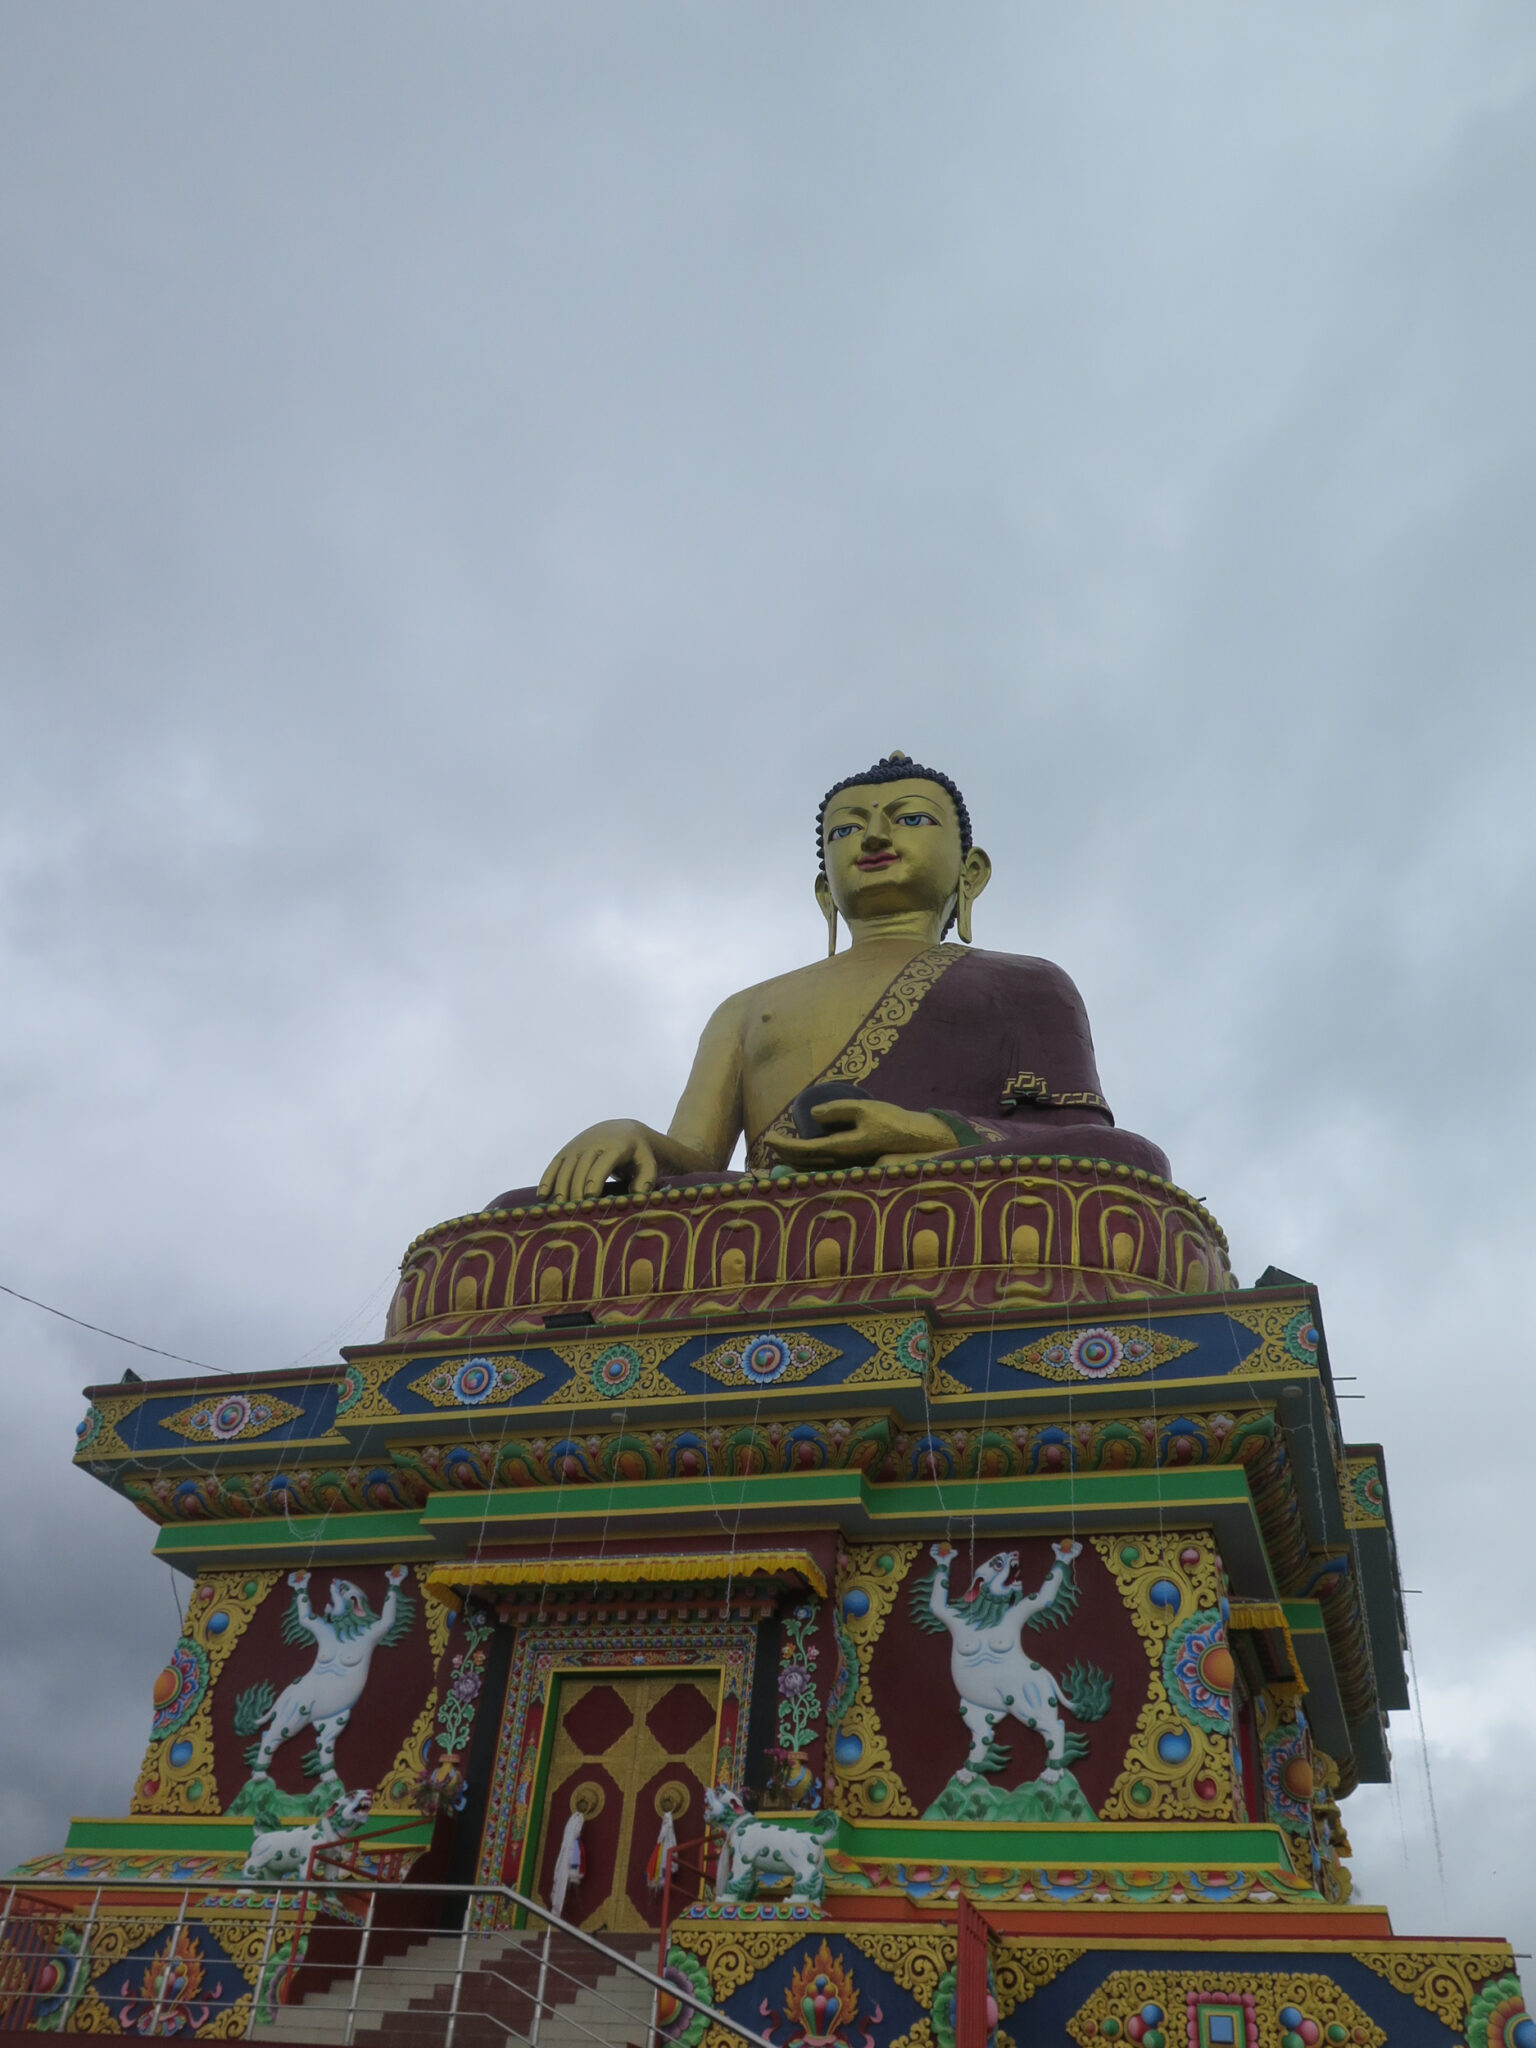 View from below of colossal Buddha statue seated atop colorful, magnificently decorated plinth